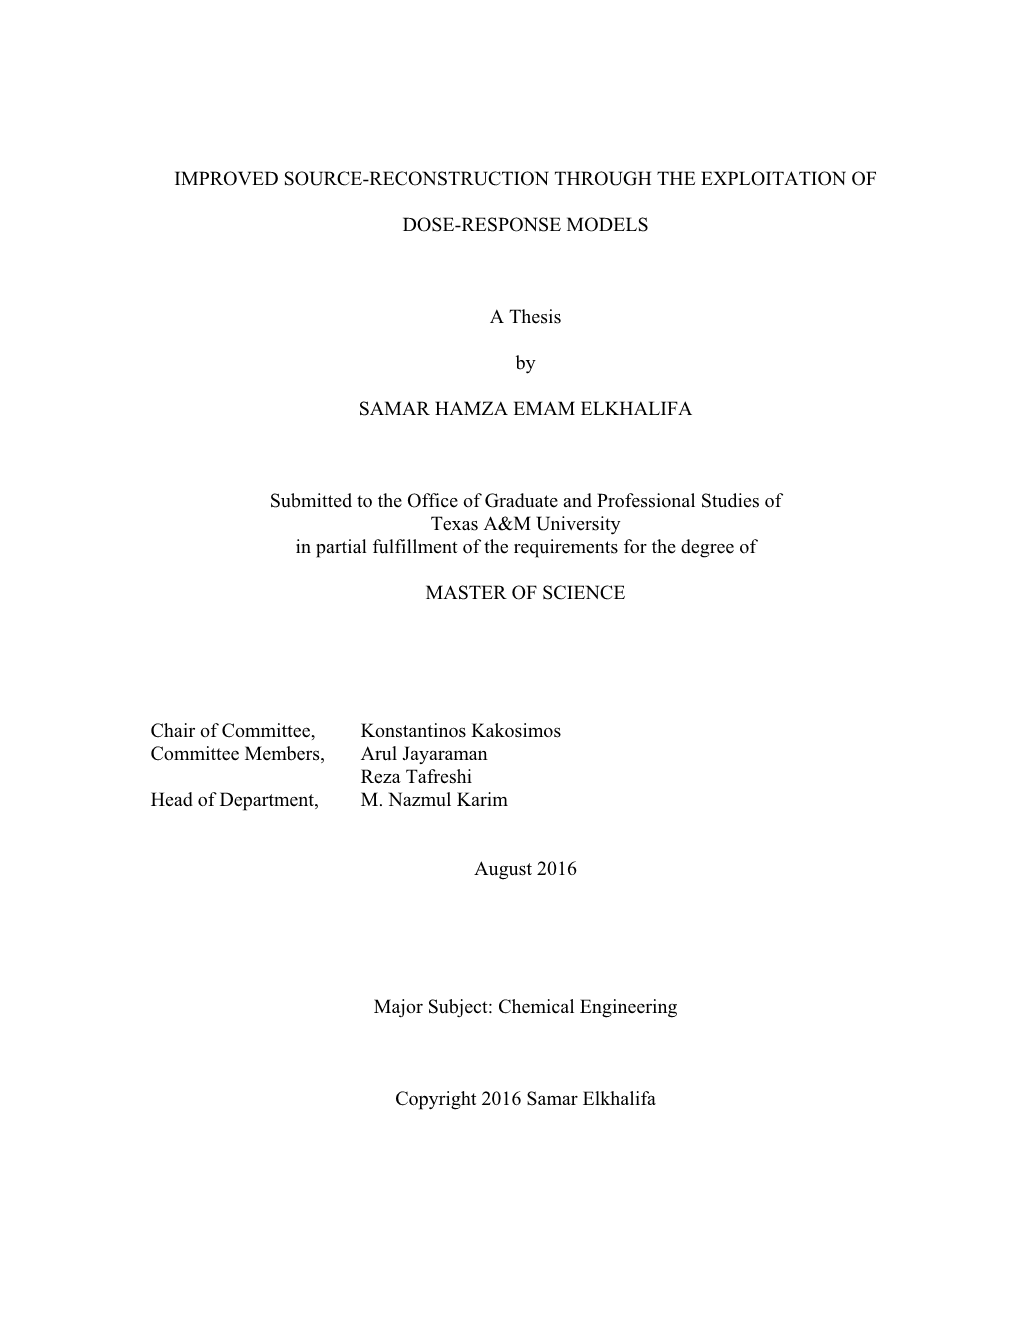 IMPROVED SOURCE-RECONSTRUCTION THROUGH the EXPLOITATION of DOSE-RESPONSE MODELS a Thesis by SAMAR HAMZA EMAM ELKHALIFA Submitte